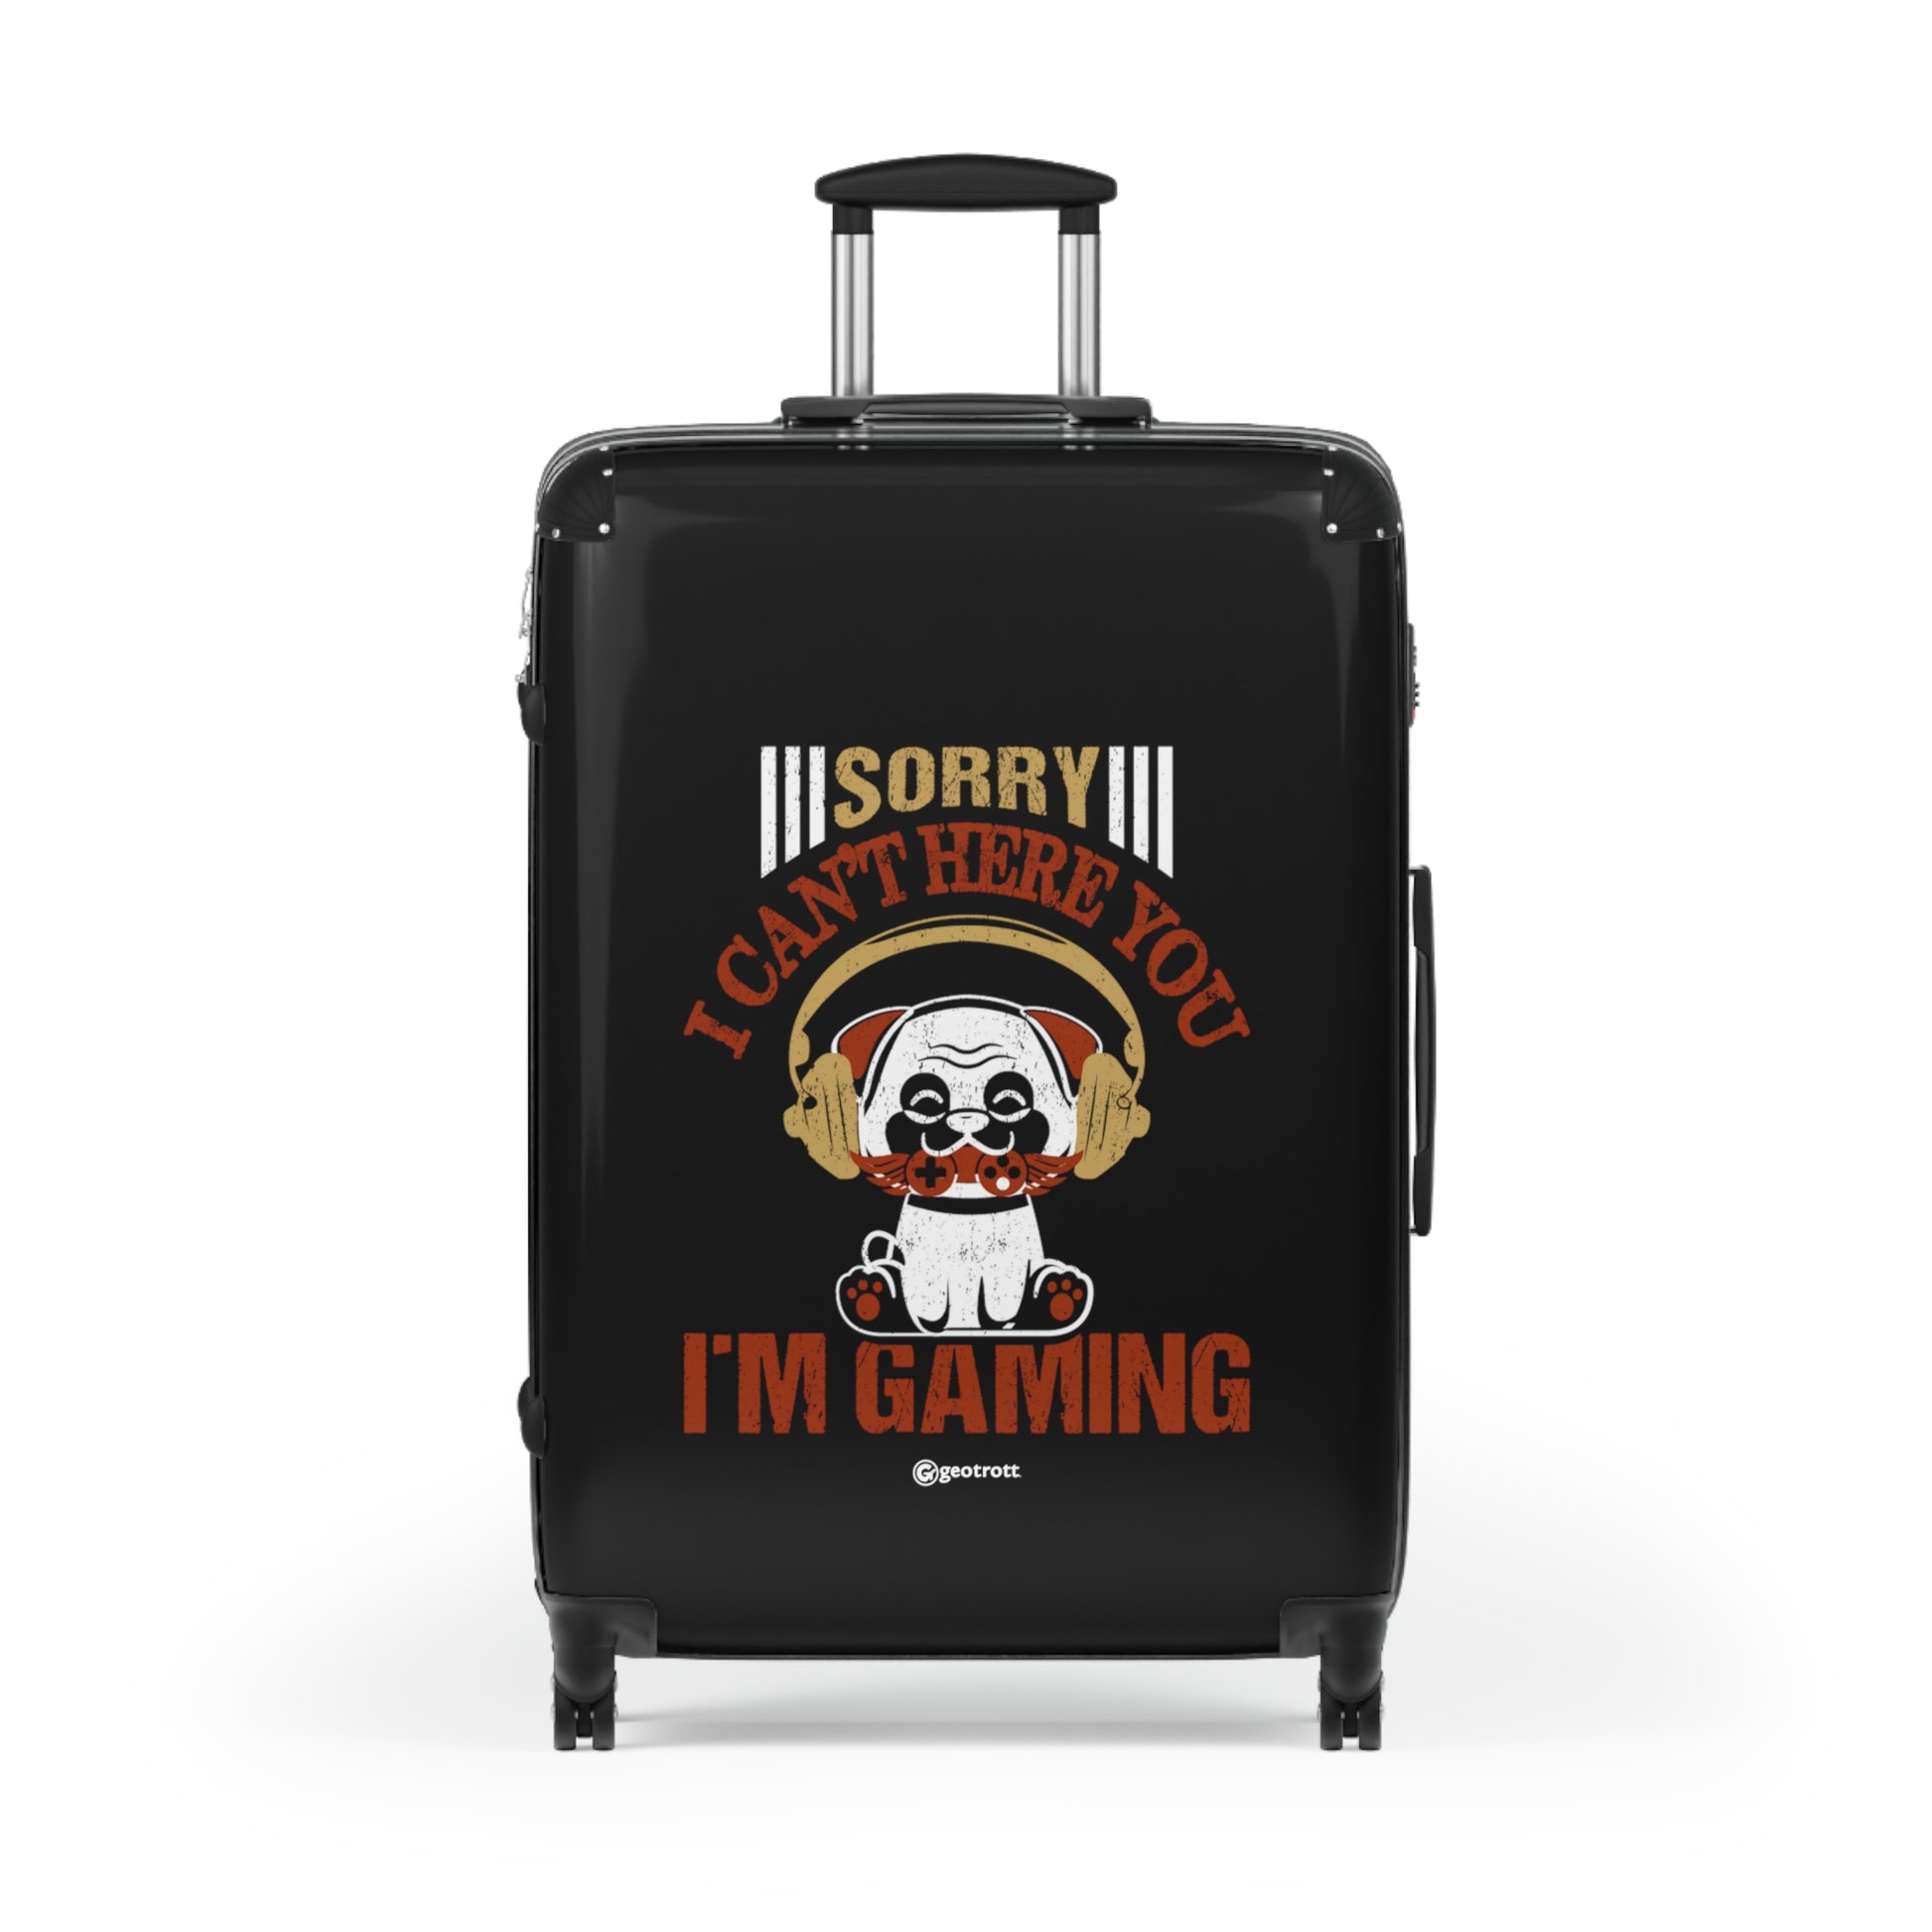 Sorry I can't Hear you I am Gaming 2 Gamer Gaming Suitcase-Bags-Geotrott